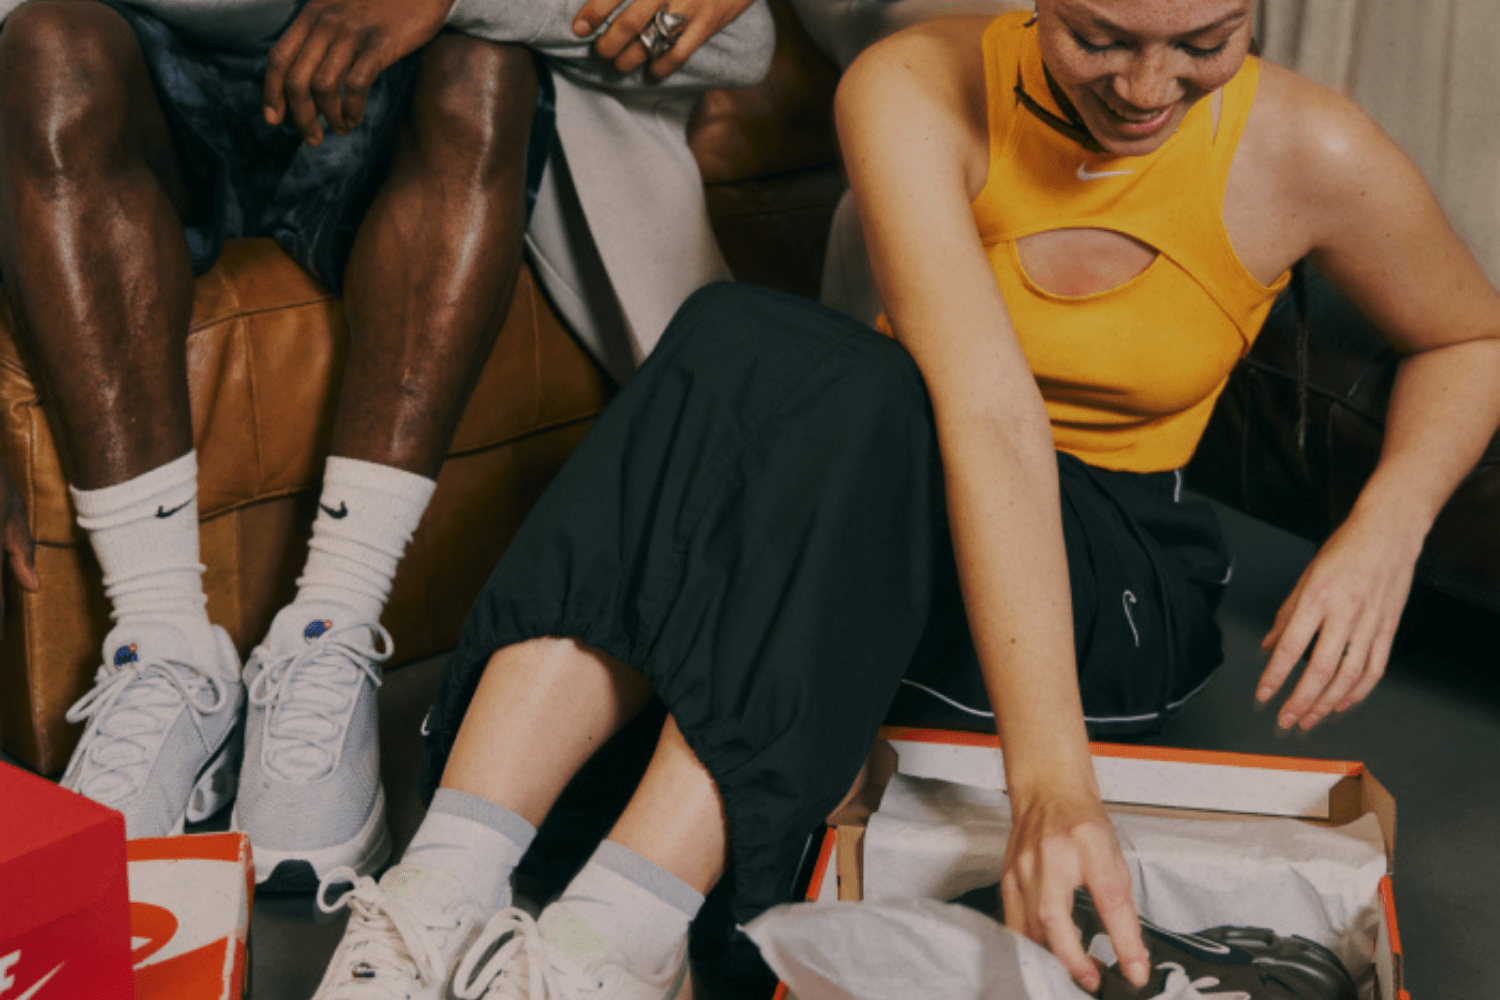 Nike Members can enjoy 25% off full priced items